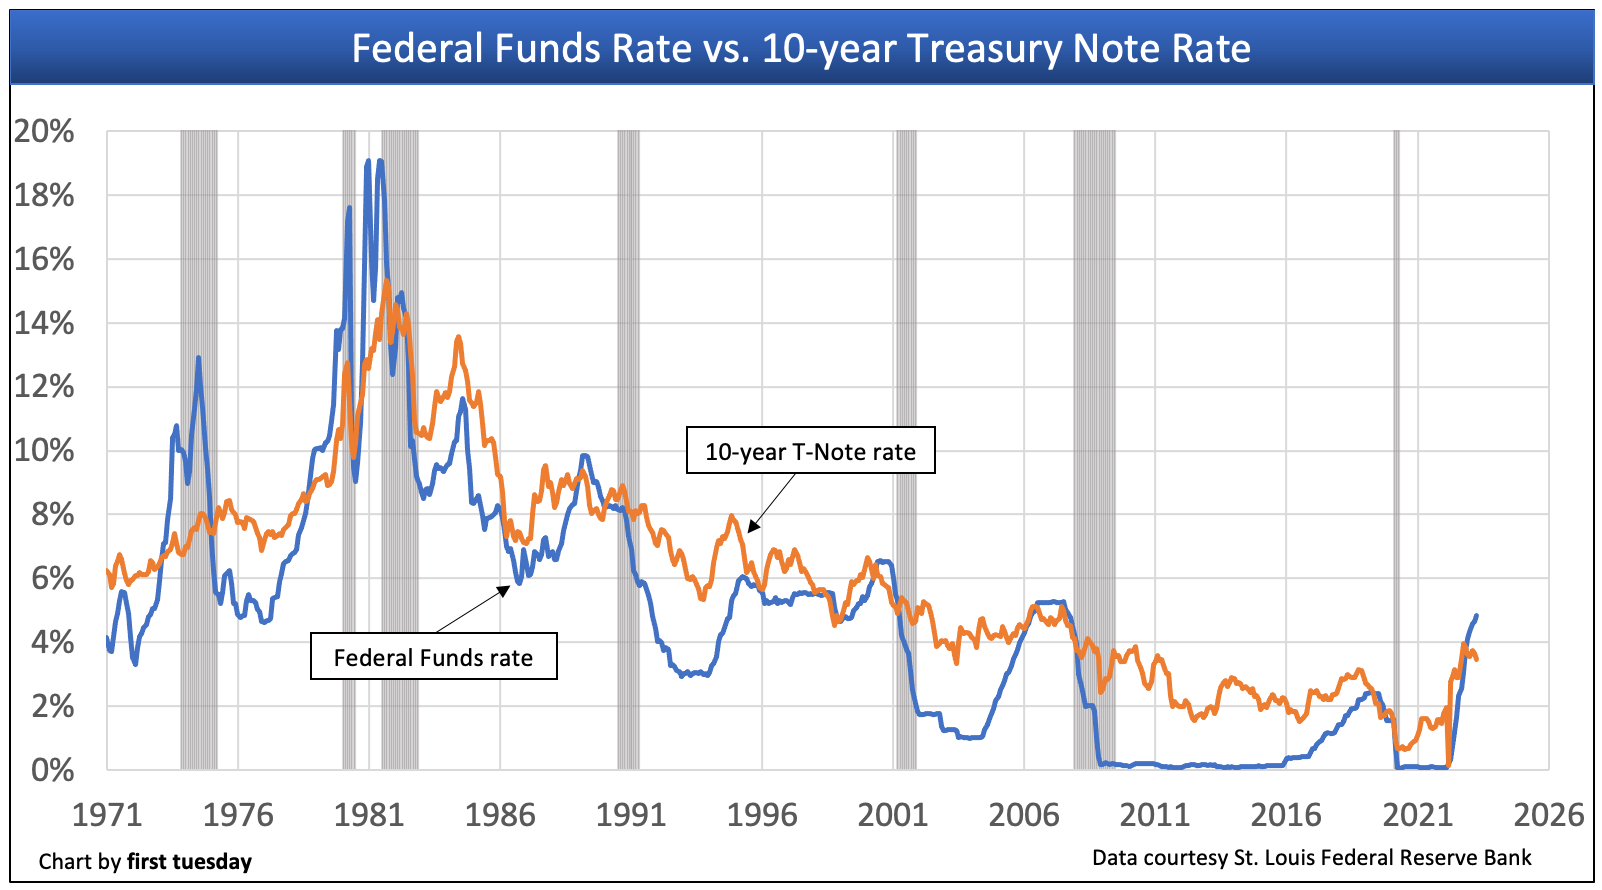 This chart shows the average Federal Funds rate versus the 10-year Treasury Note rate.